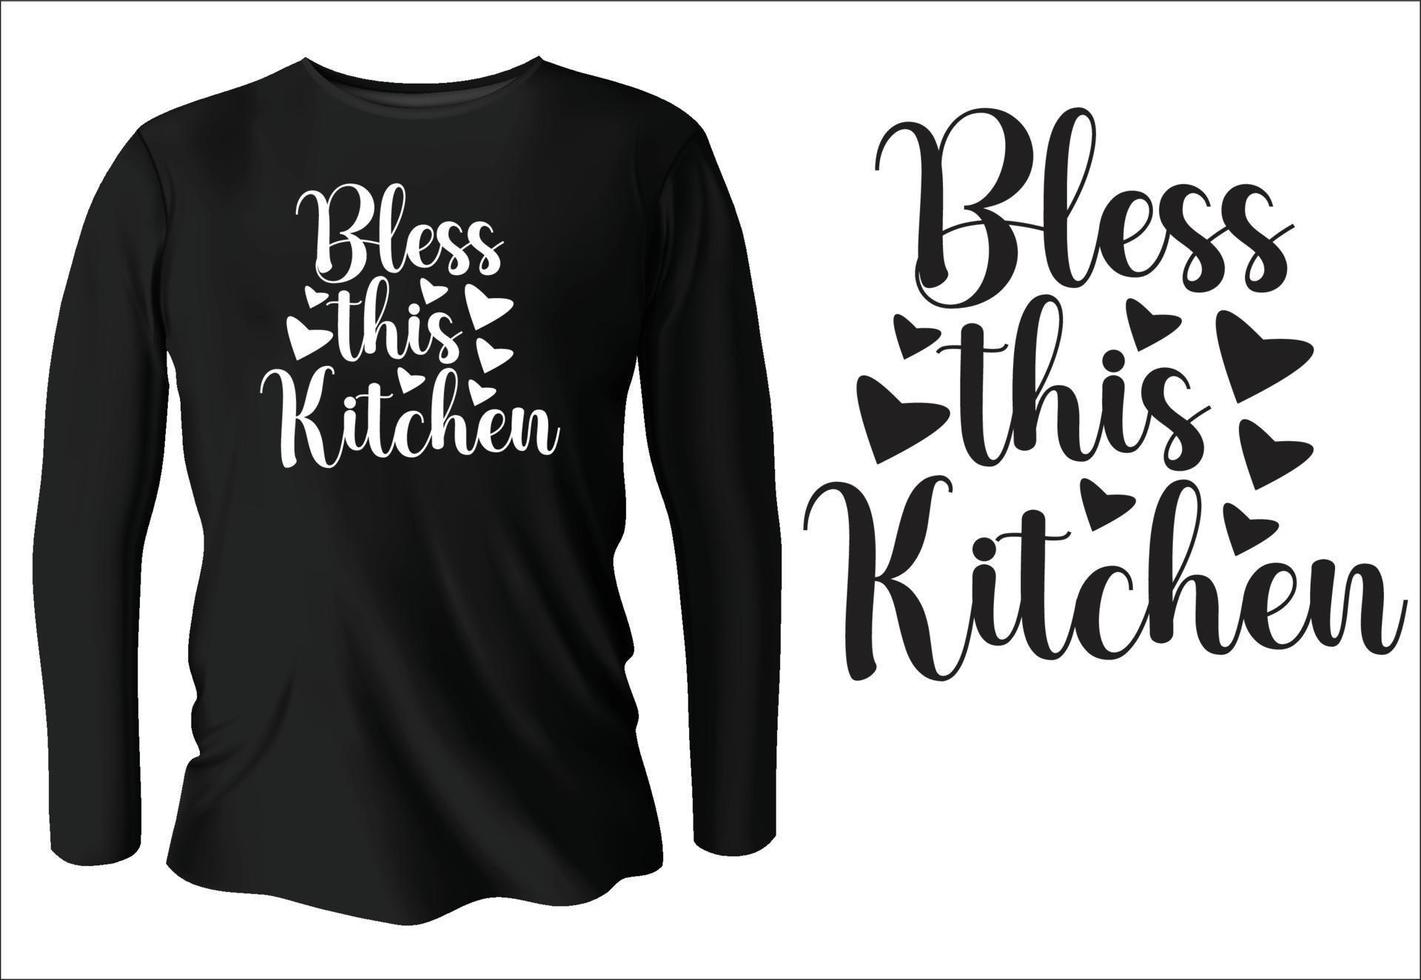 bless this kitchen t-shirt design with vector